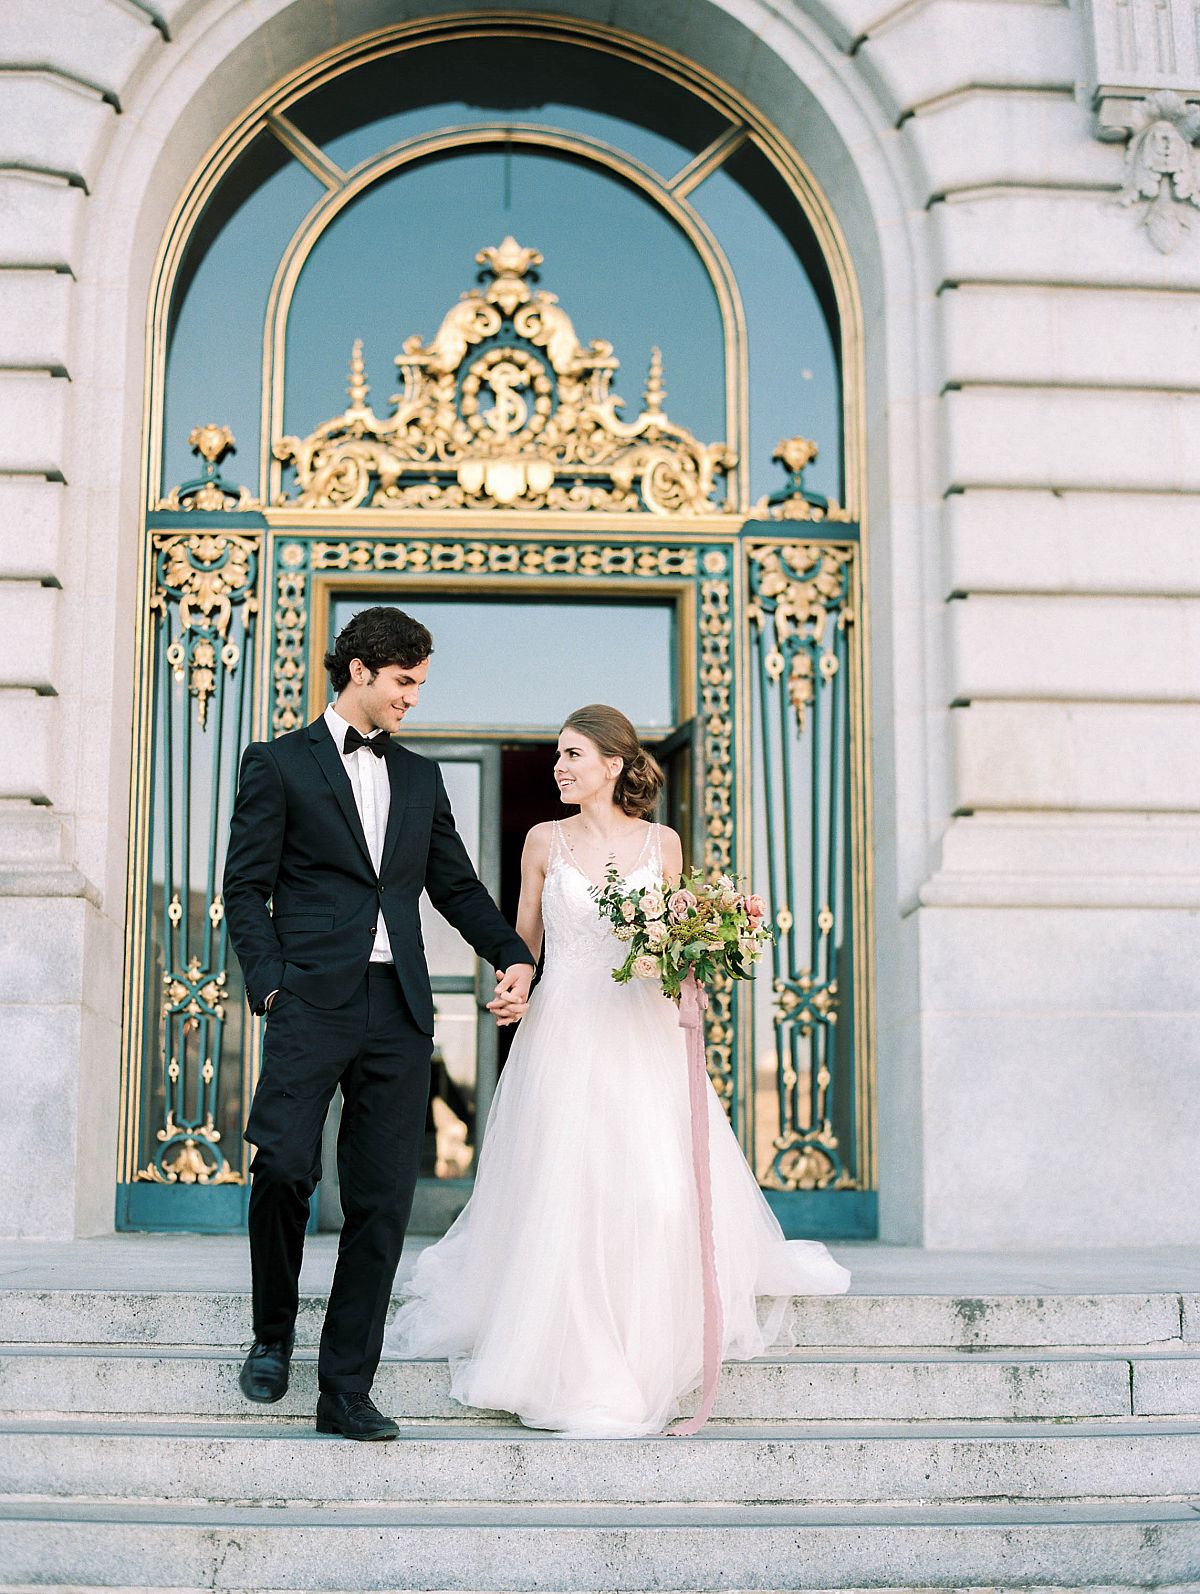 How a City Hall Elopement can be Stunning and Intimate